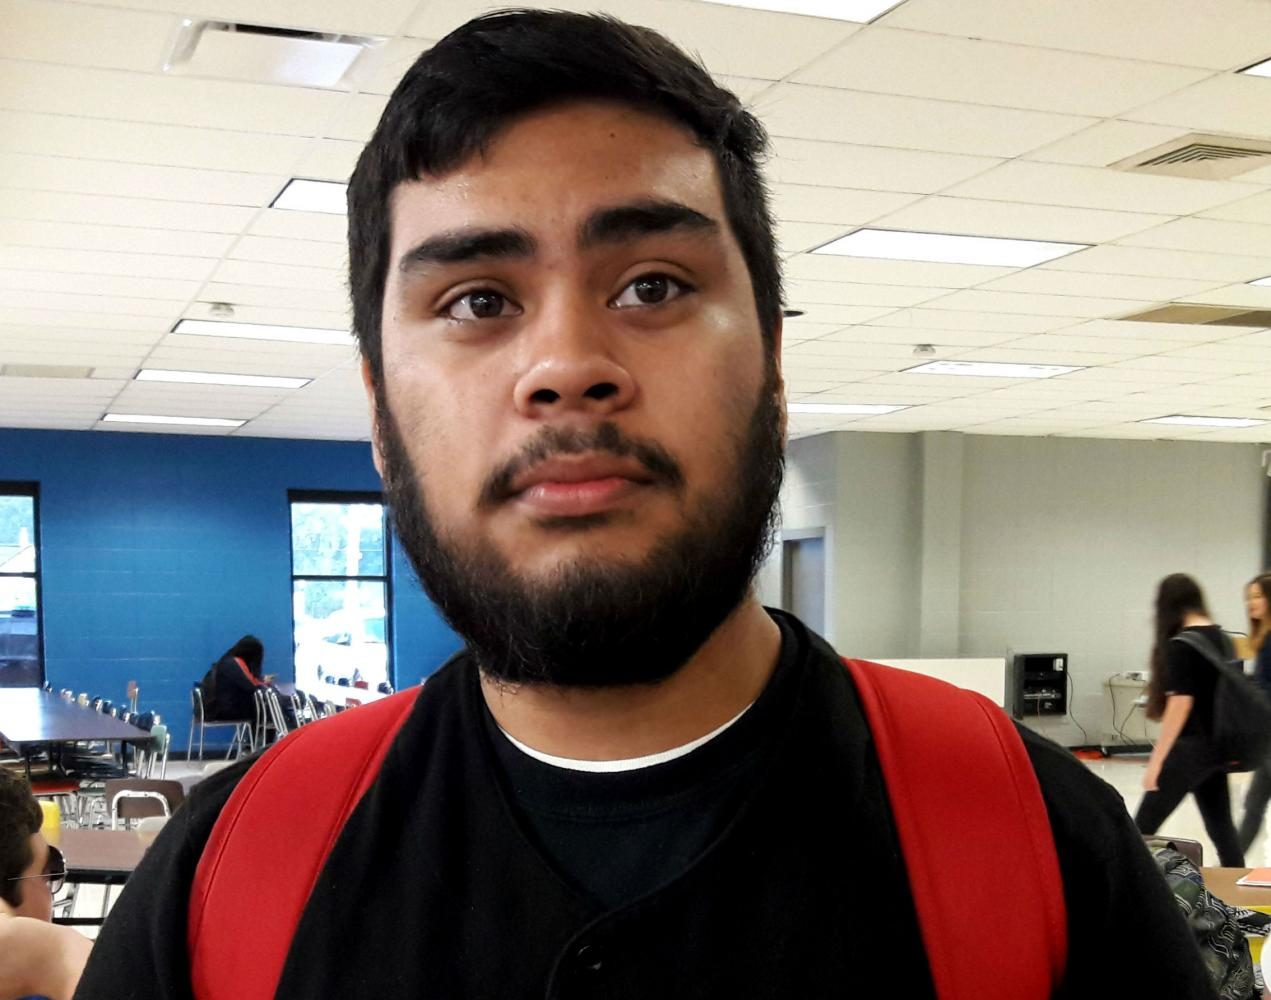 One student who is worried about his DACA status is senior Edgar Arevalo.